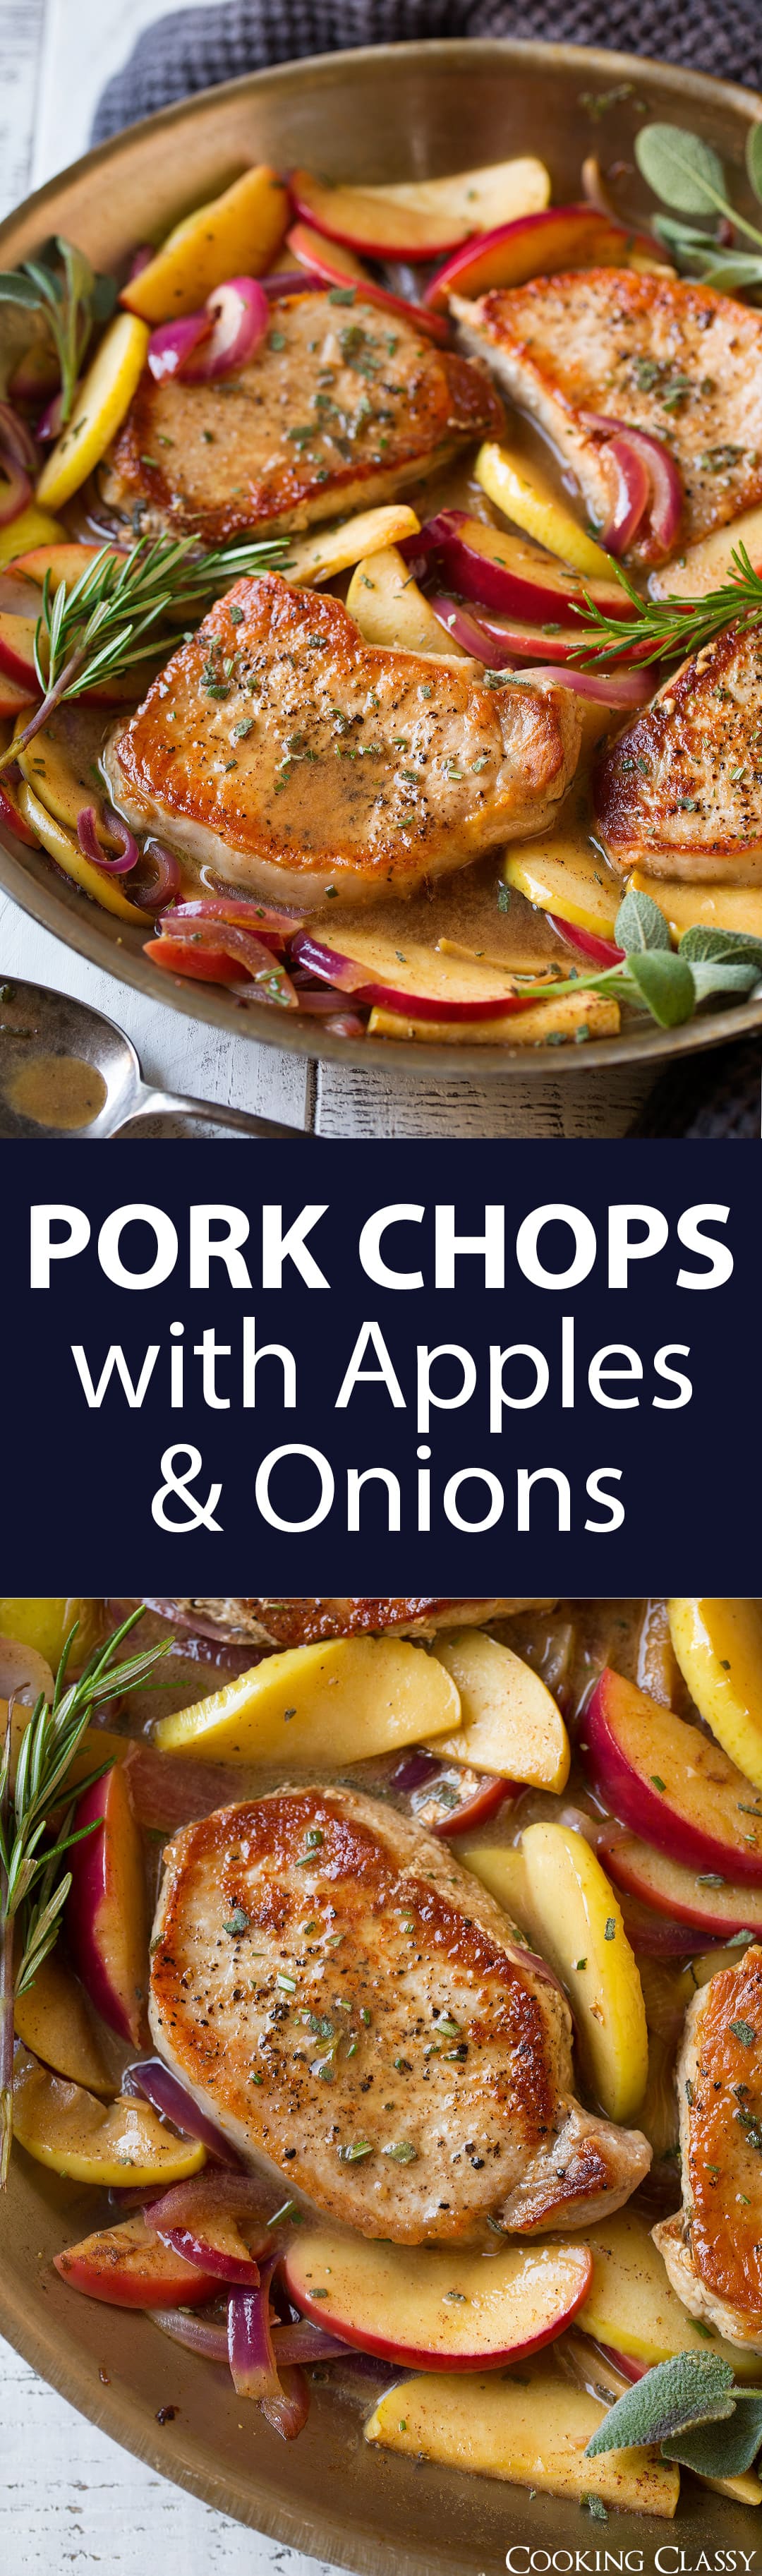 Pork Chops with Apples and Onions - Cooking Classy